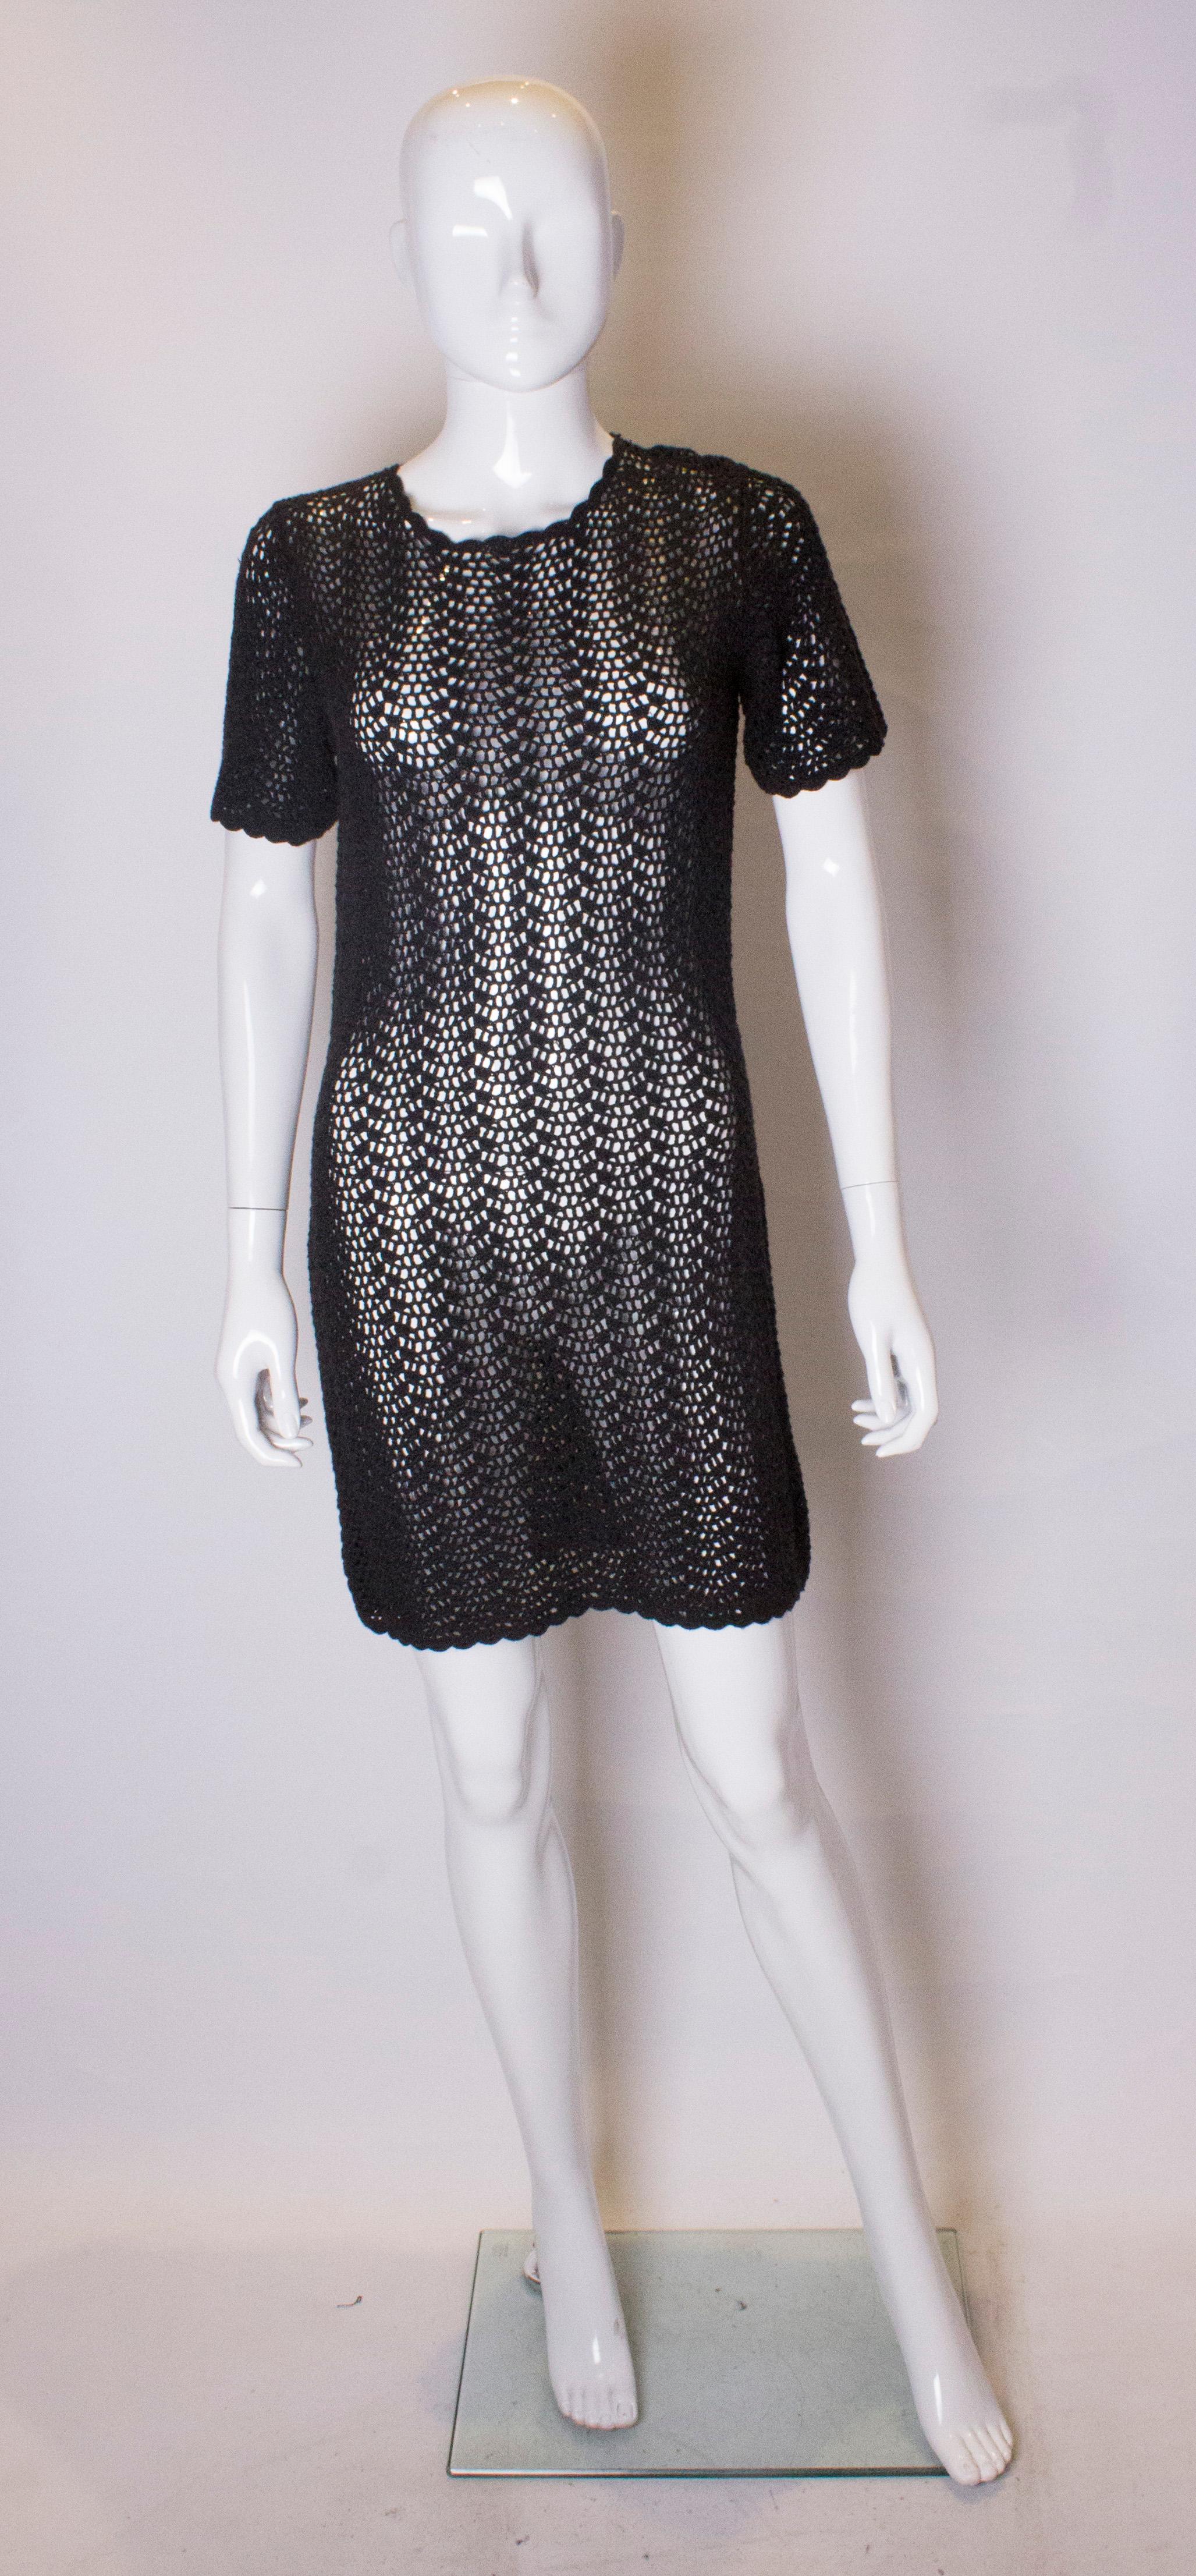 A chic crochet vintage party dress. This black mini dress has cap sleeves and a scallop edge on the hem, neckline and arms.